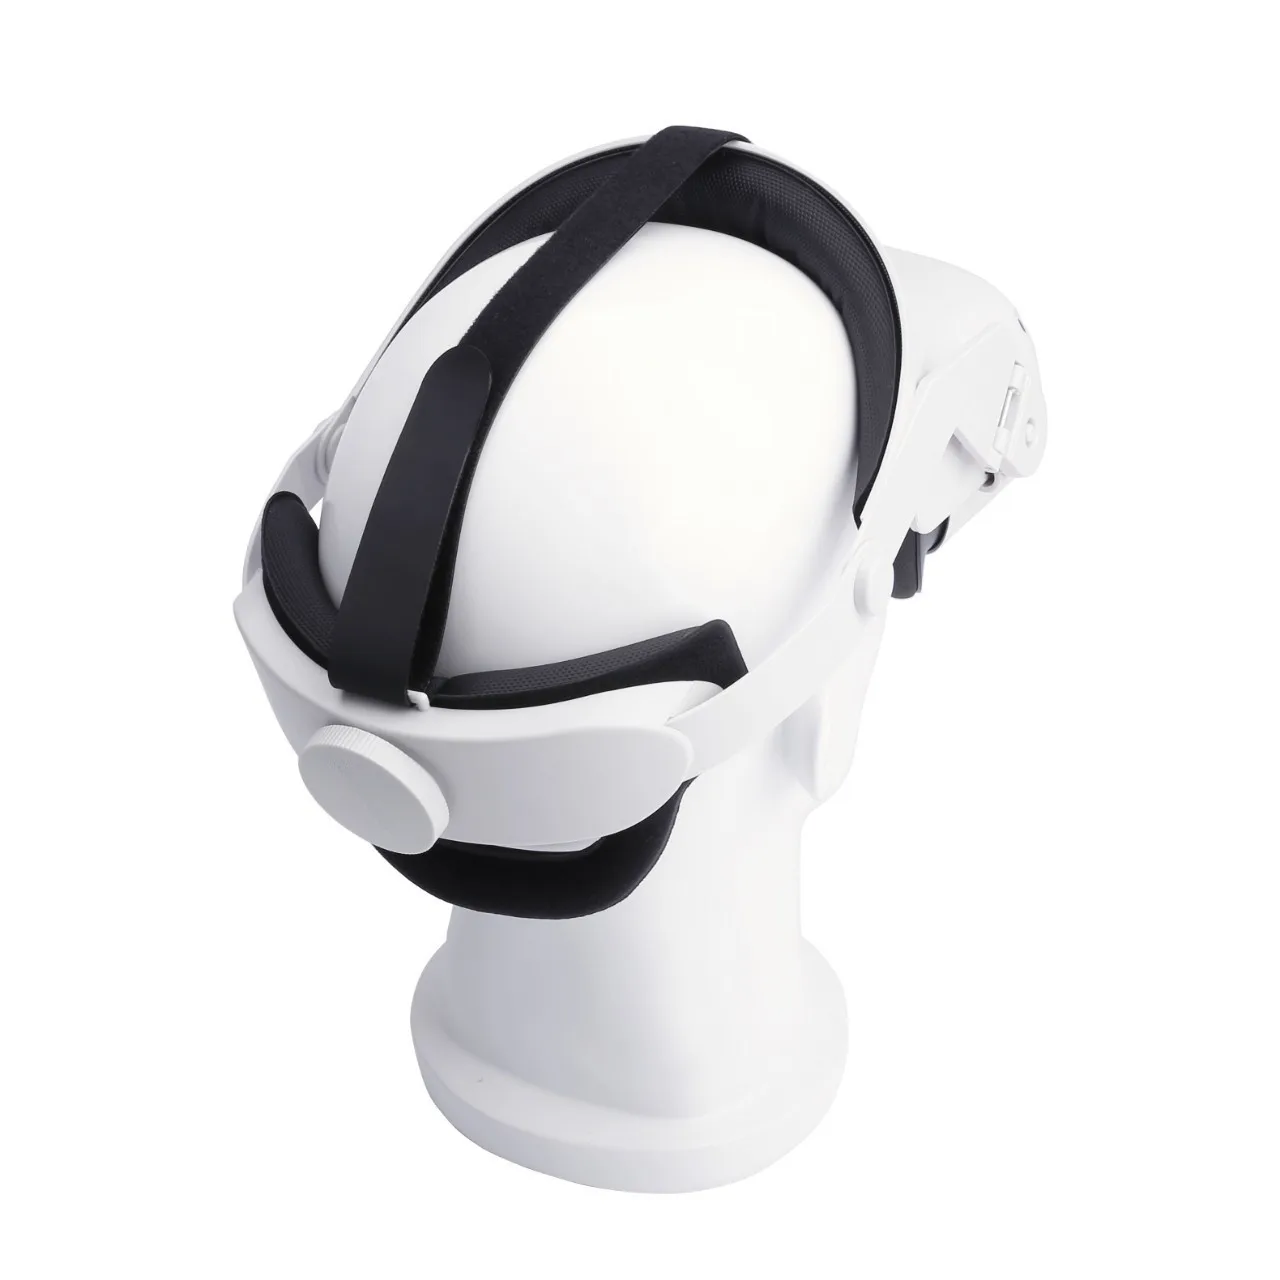 Replace Virtual Reality Quest 2 Elite Adjustable Comfortable Bracket Headband Head Strap For Oculus Quest 2 Strap vr Accessories